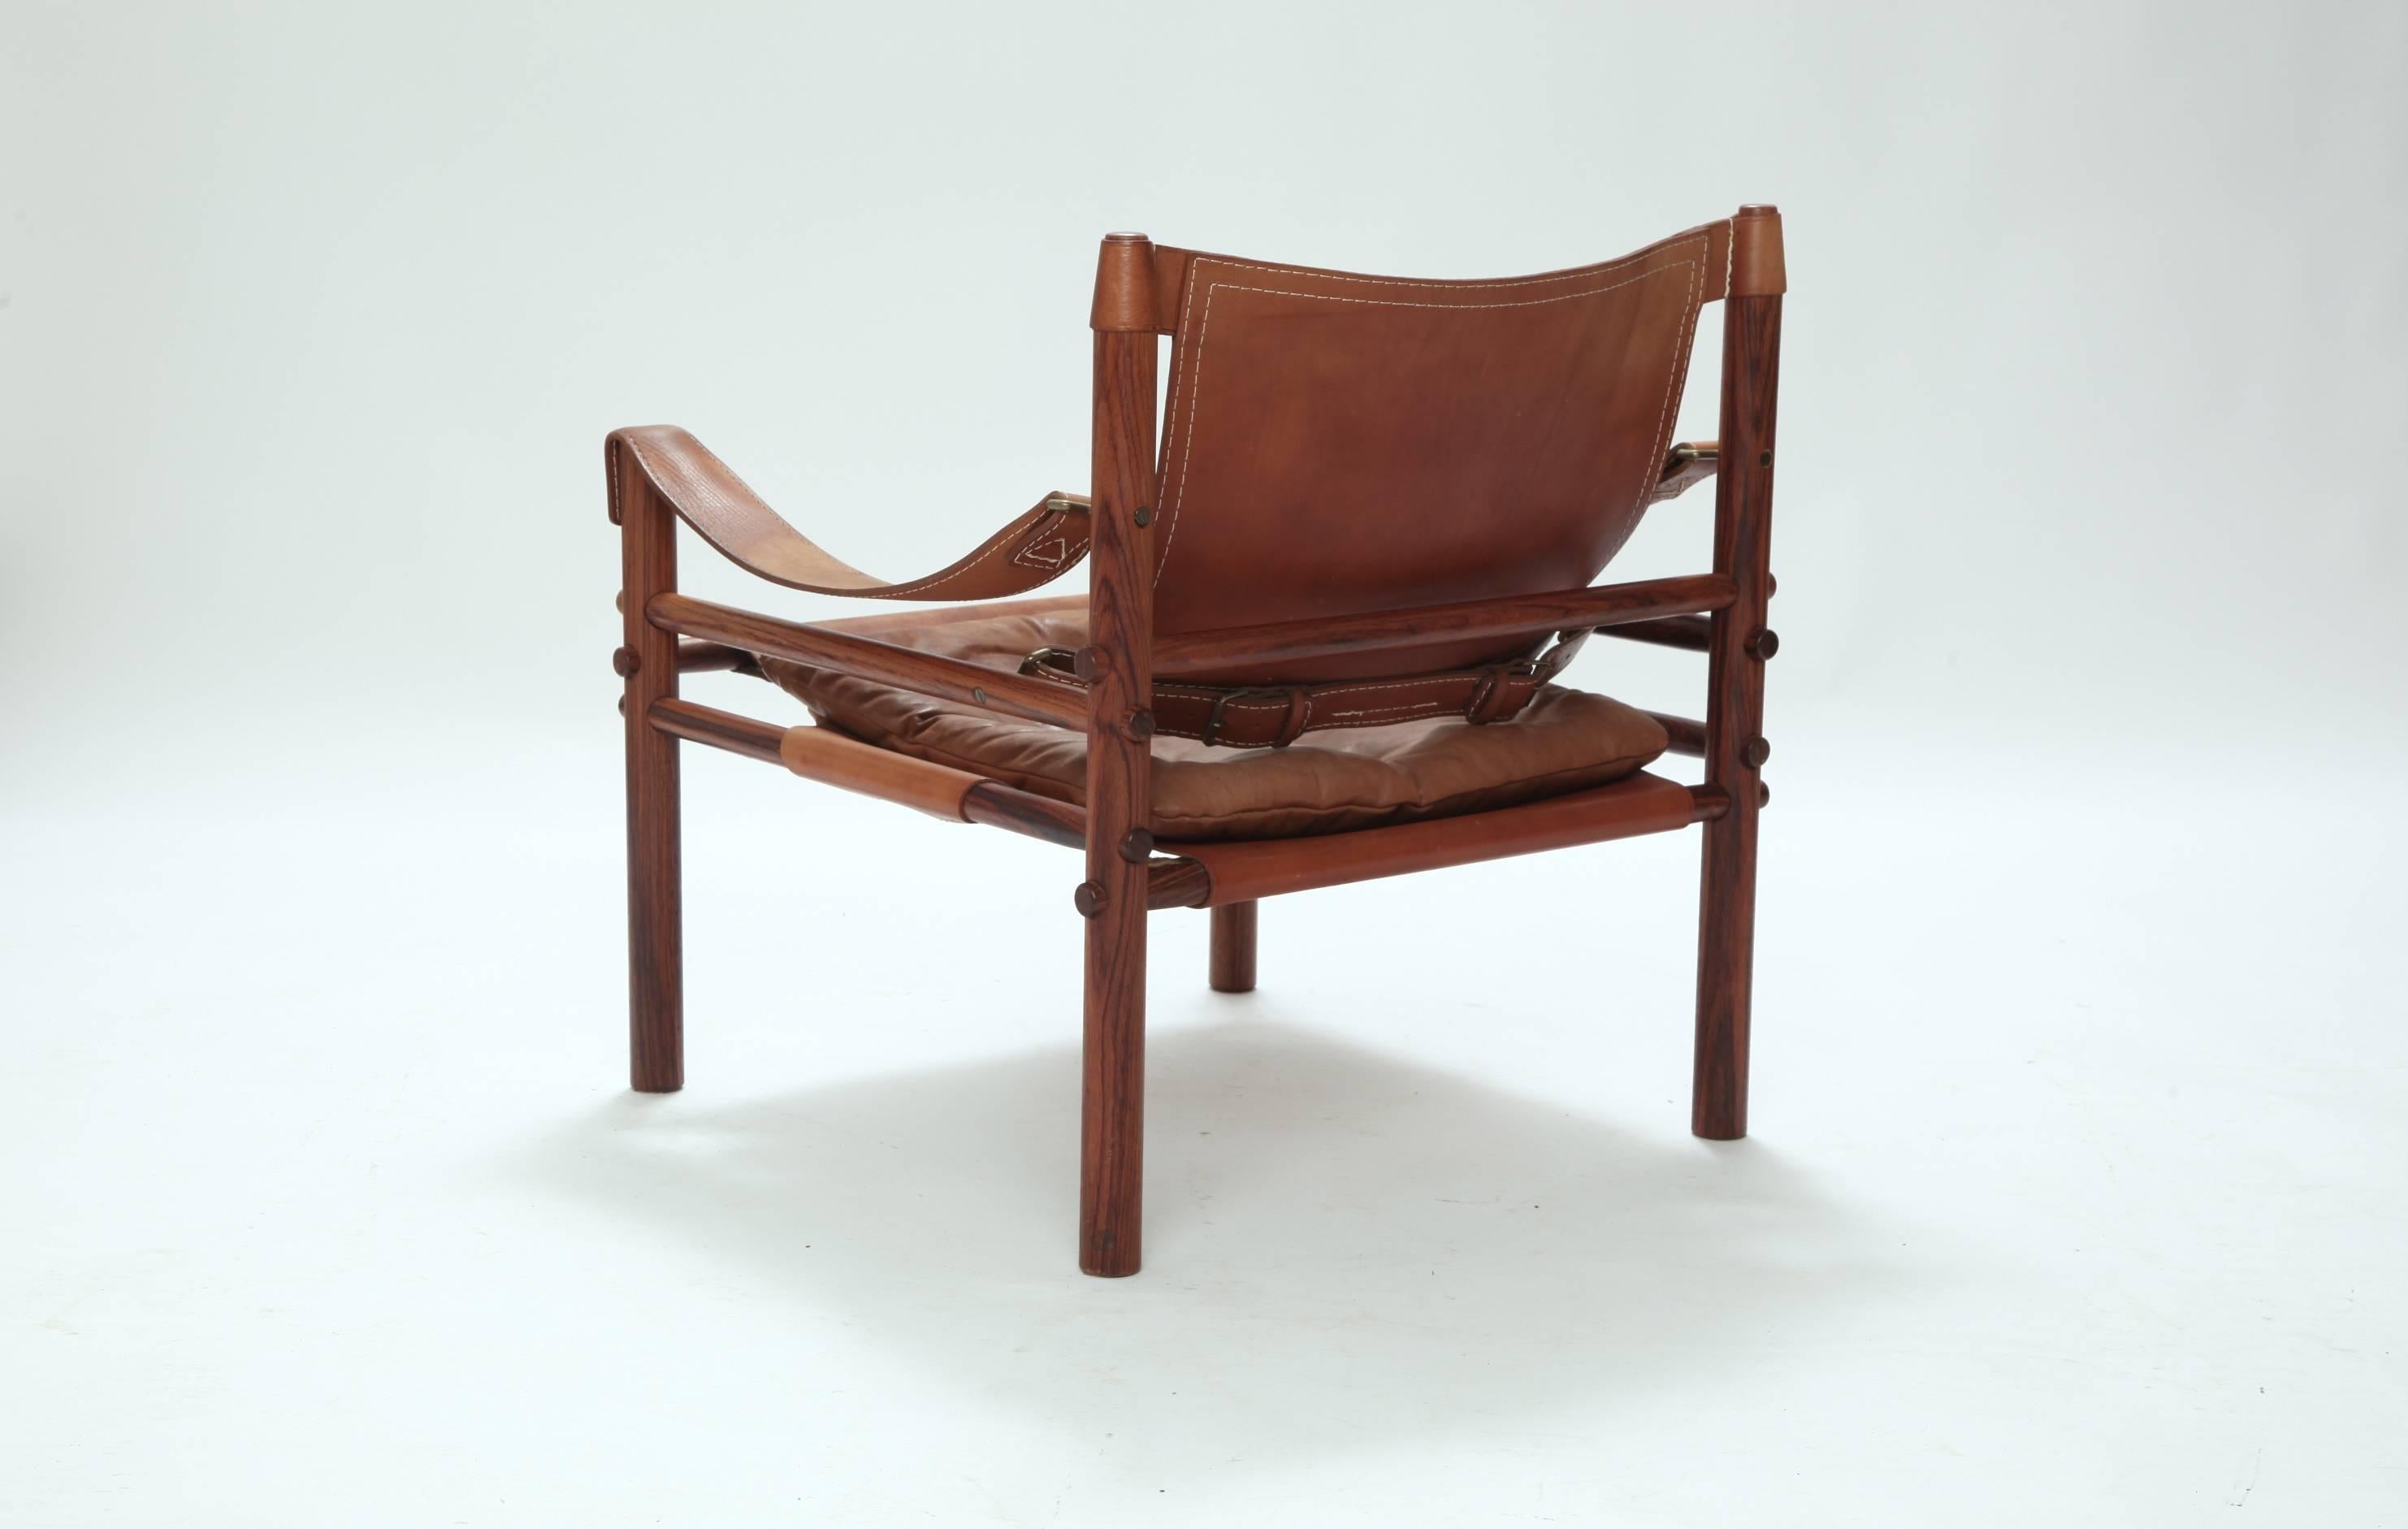 Leather Arne Norell Rosewood Safair Sirocco Chair, Sweden, 1960s